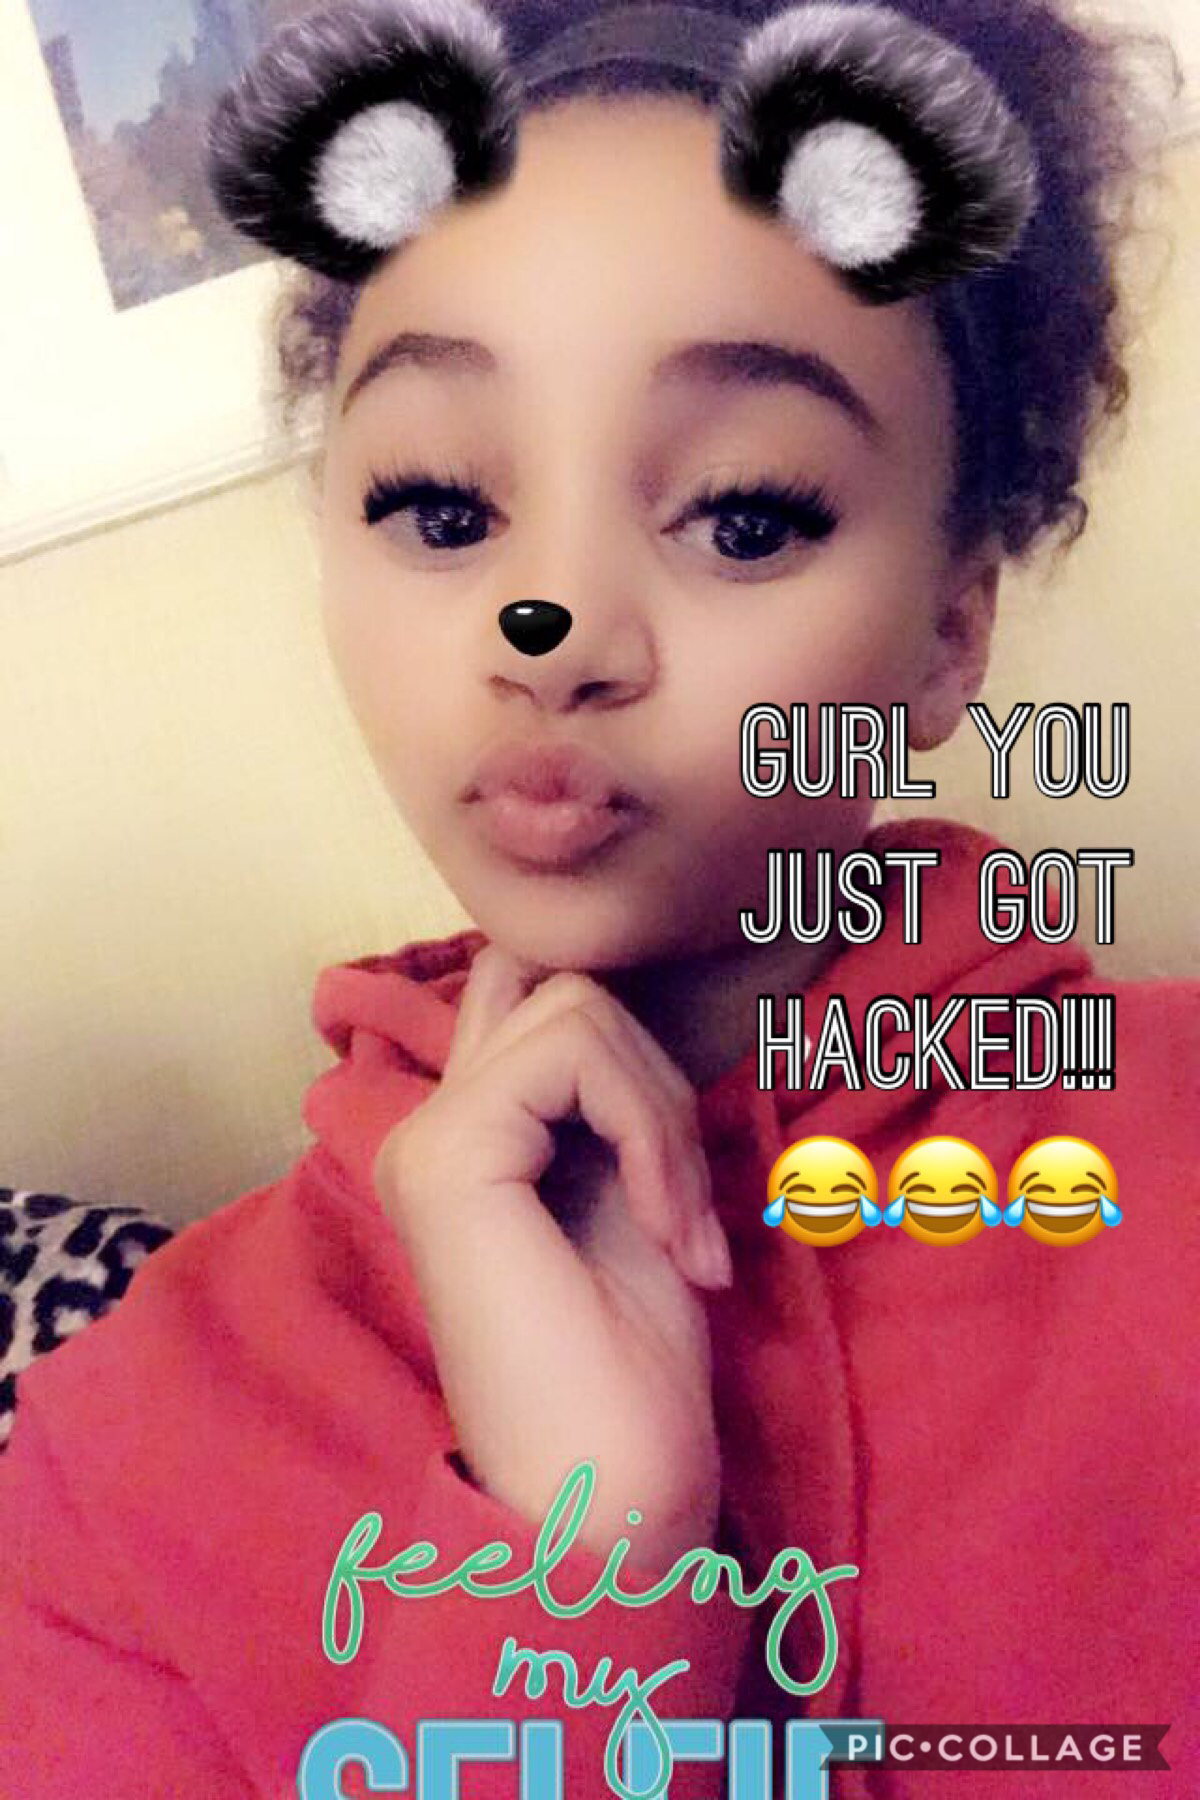 Just got hacked by your gurl!!! 🤪😂